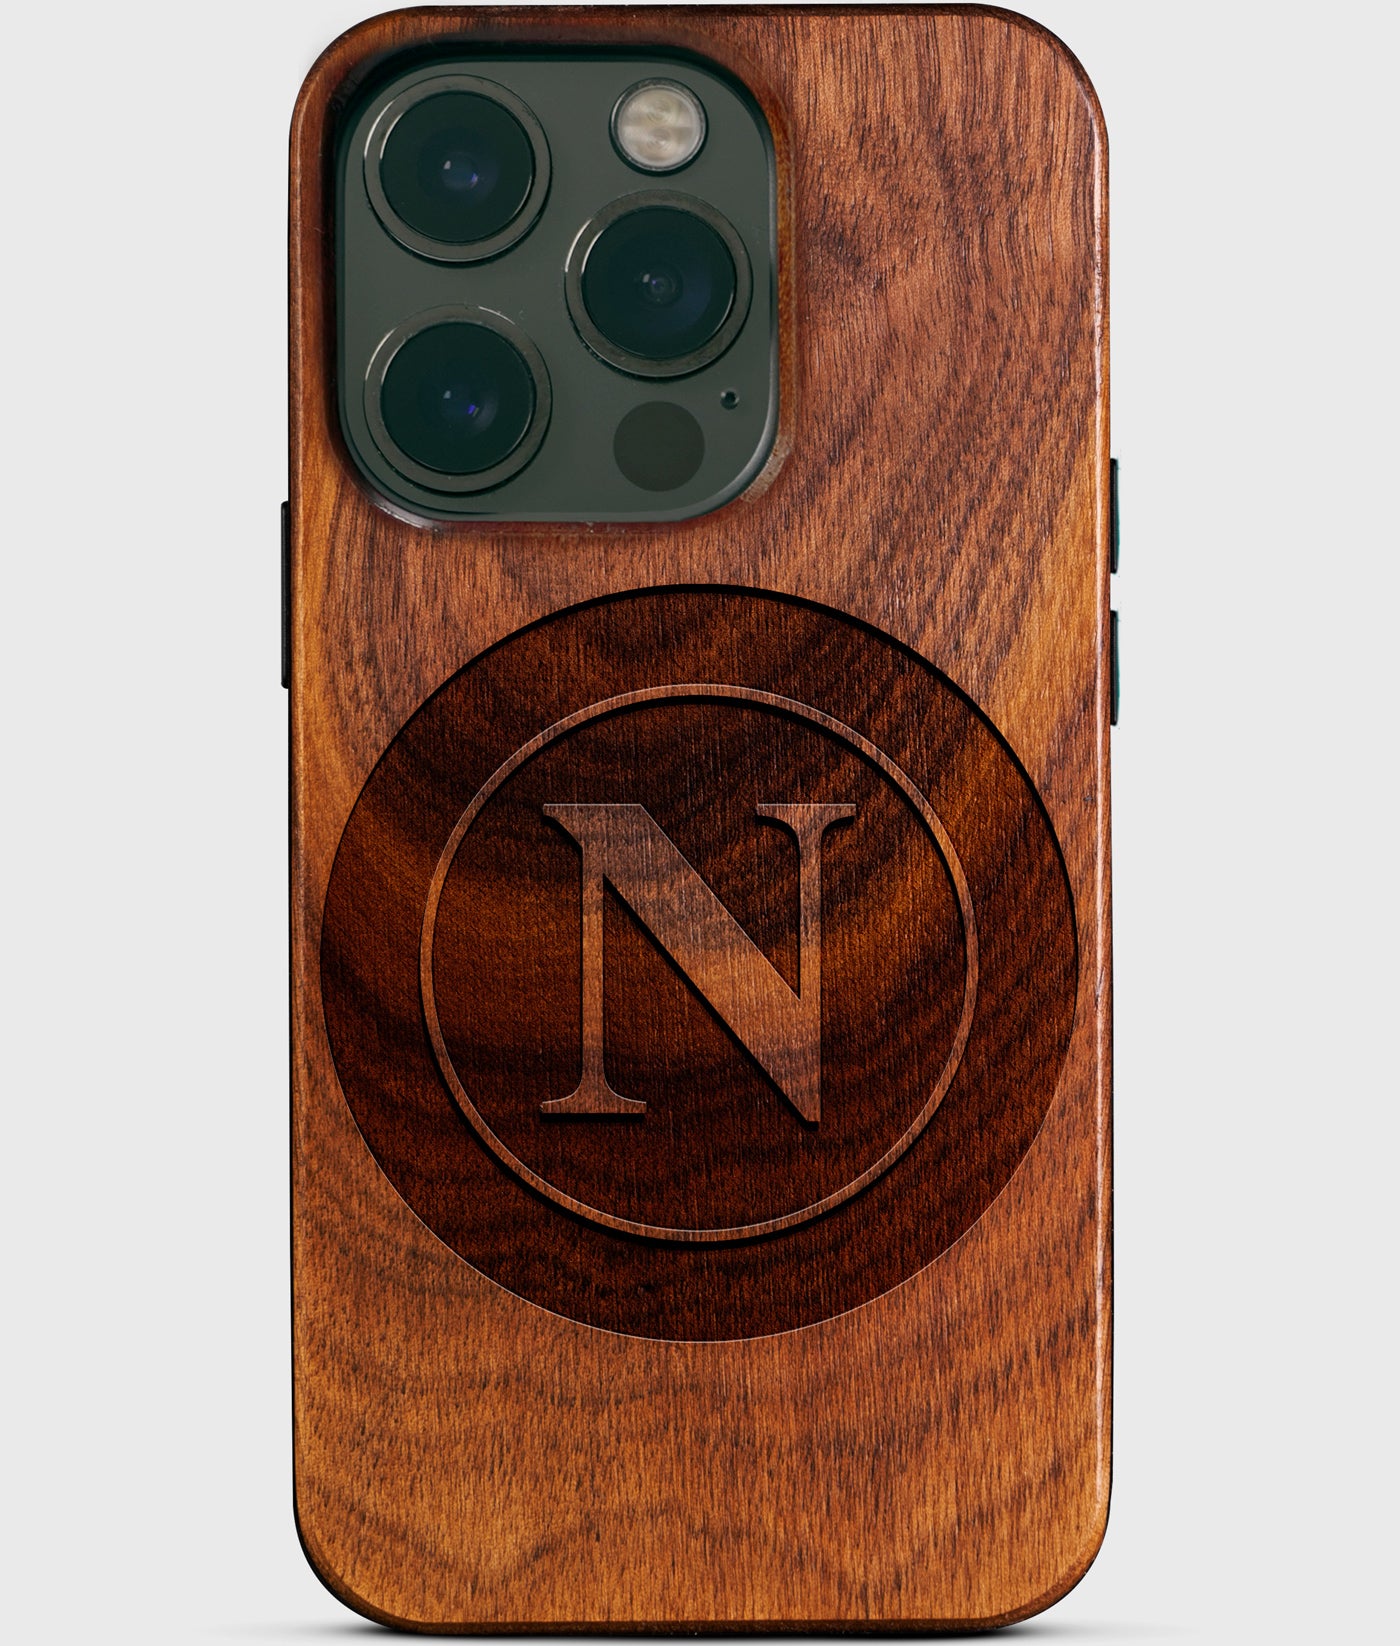 Custom SSC Napoli iPhone 14 Pro Cases - SSC Napoli Personalized iPhone 14 Pro Cover - Italian Football Club SSC Napoli Gifts For Men 2022 Best SSC Napoli Christmas Gifts Wood Unique Sportiva Calcio Napoli Gift For Him Monogrammed